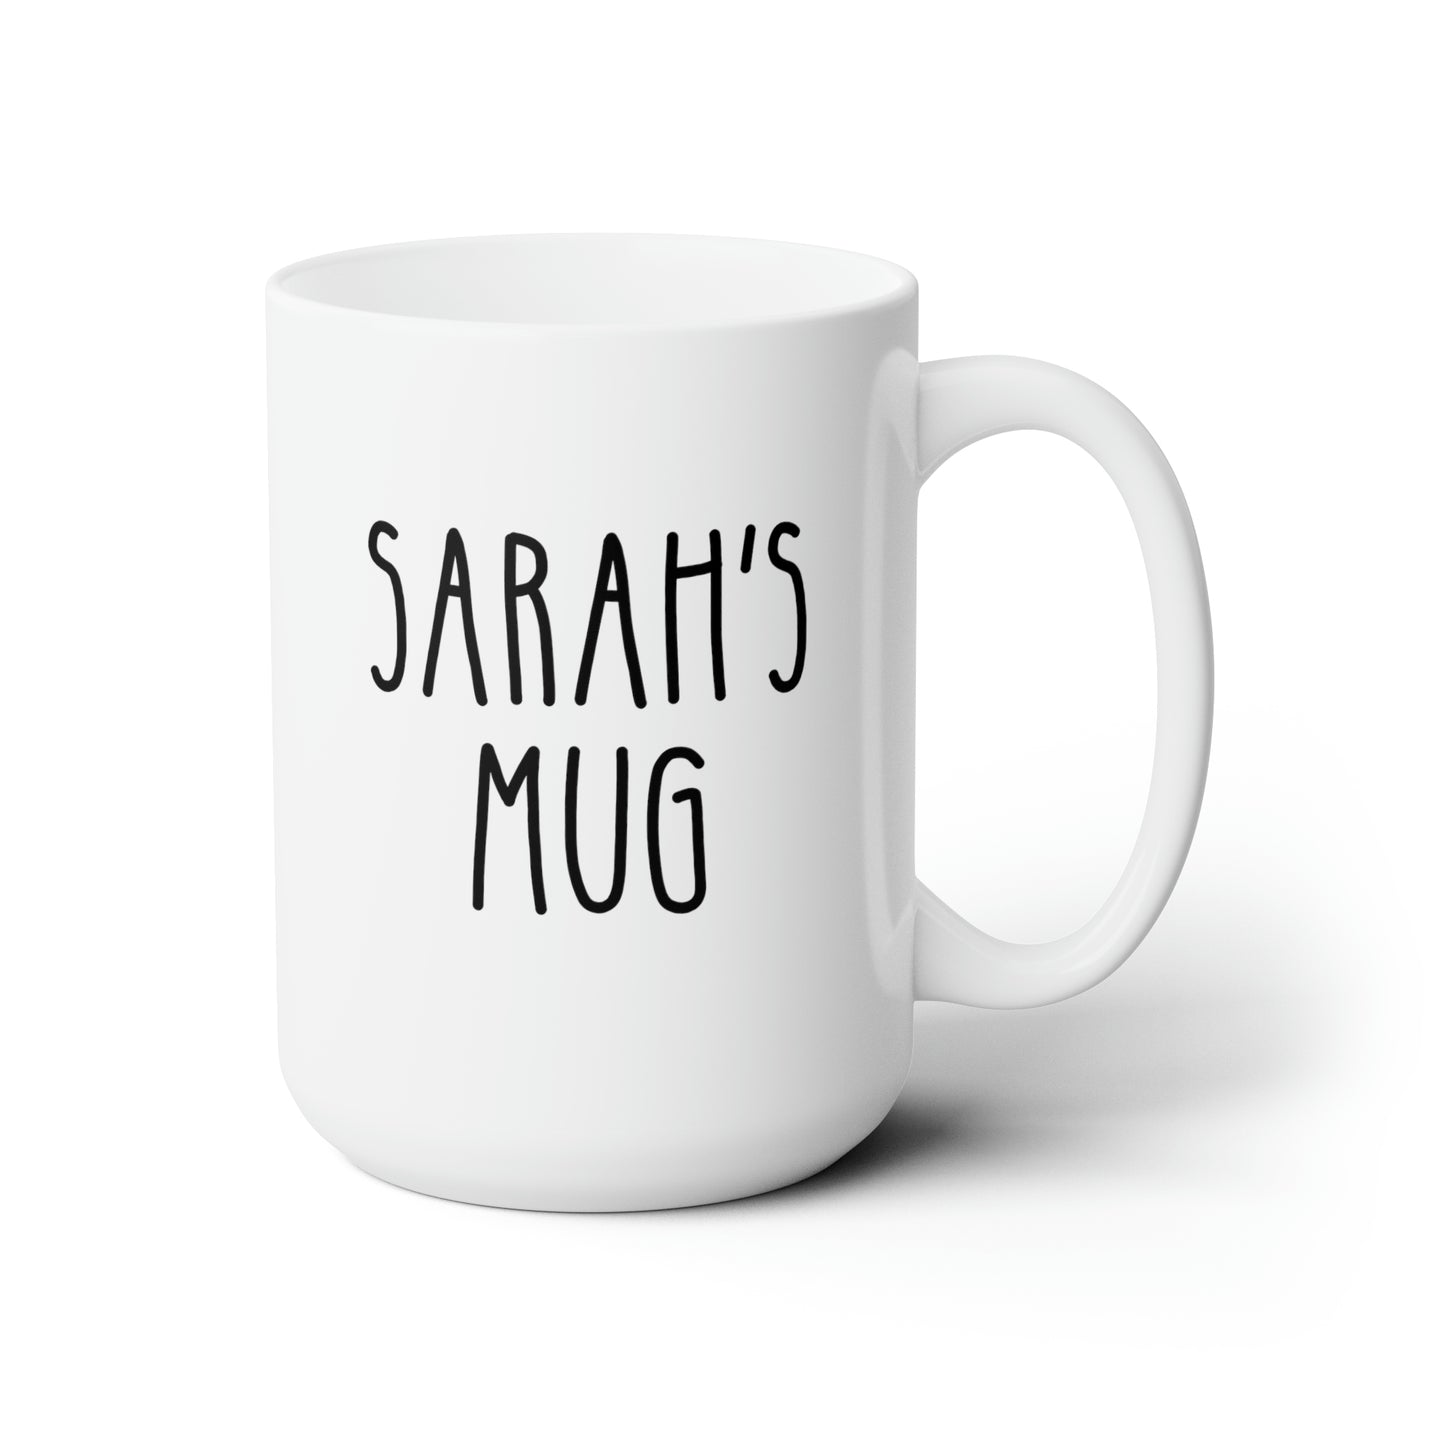 Personalized Name 15oz white funny large coffee mug gift for friend him her quote tall font custom customized cup waveywares wavey wares wavywares wavy wares